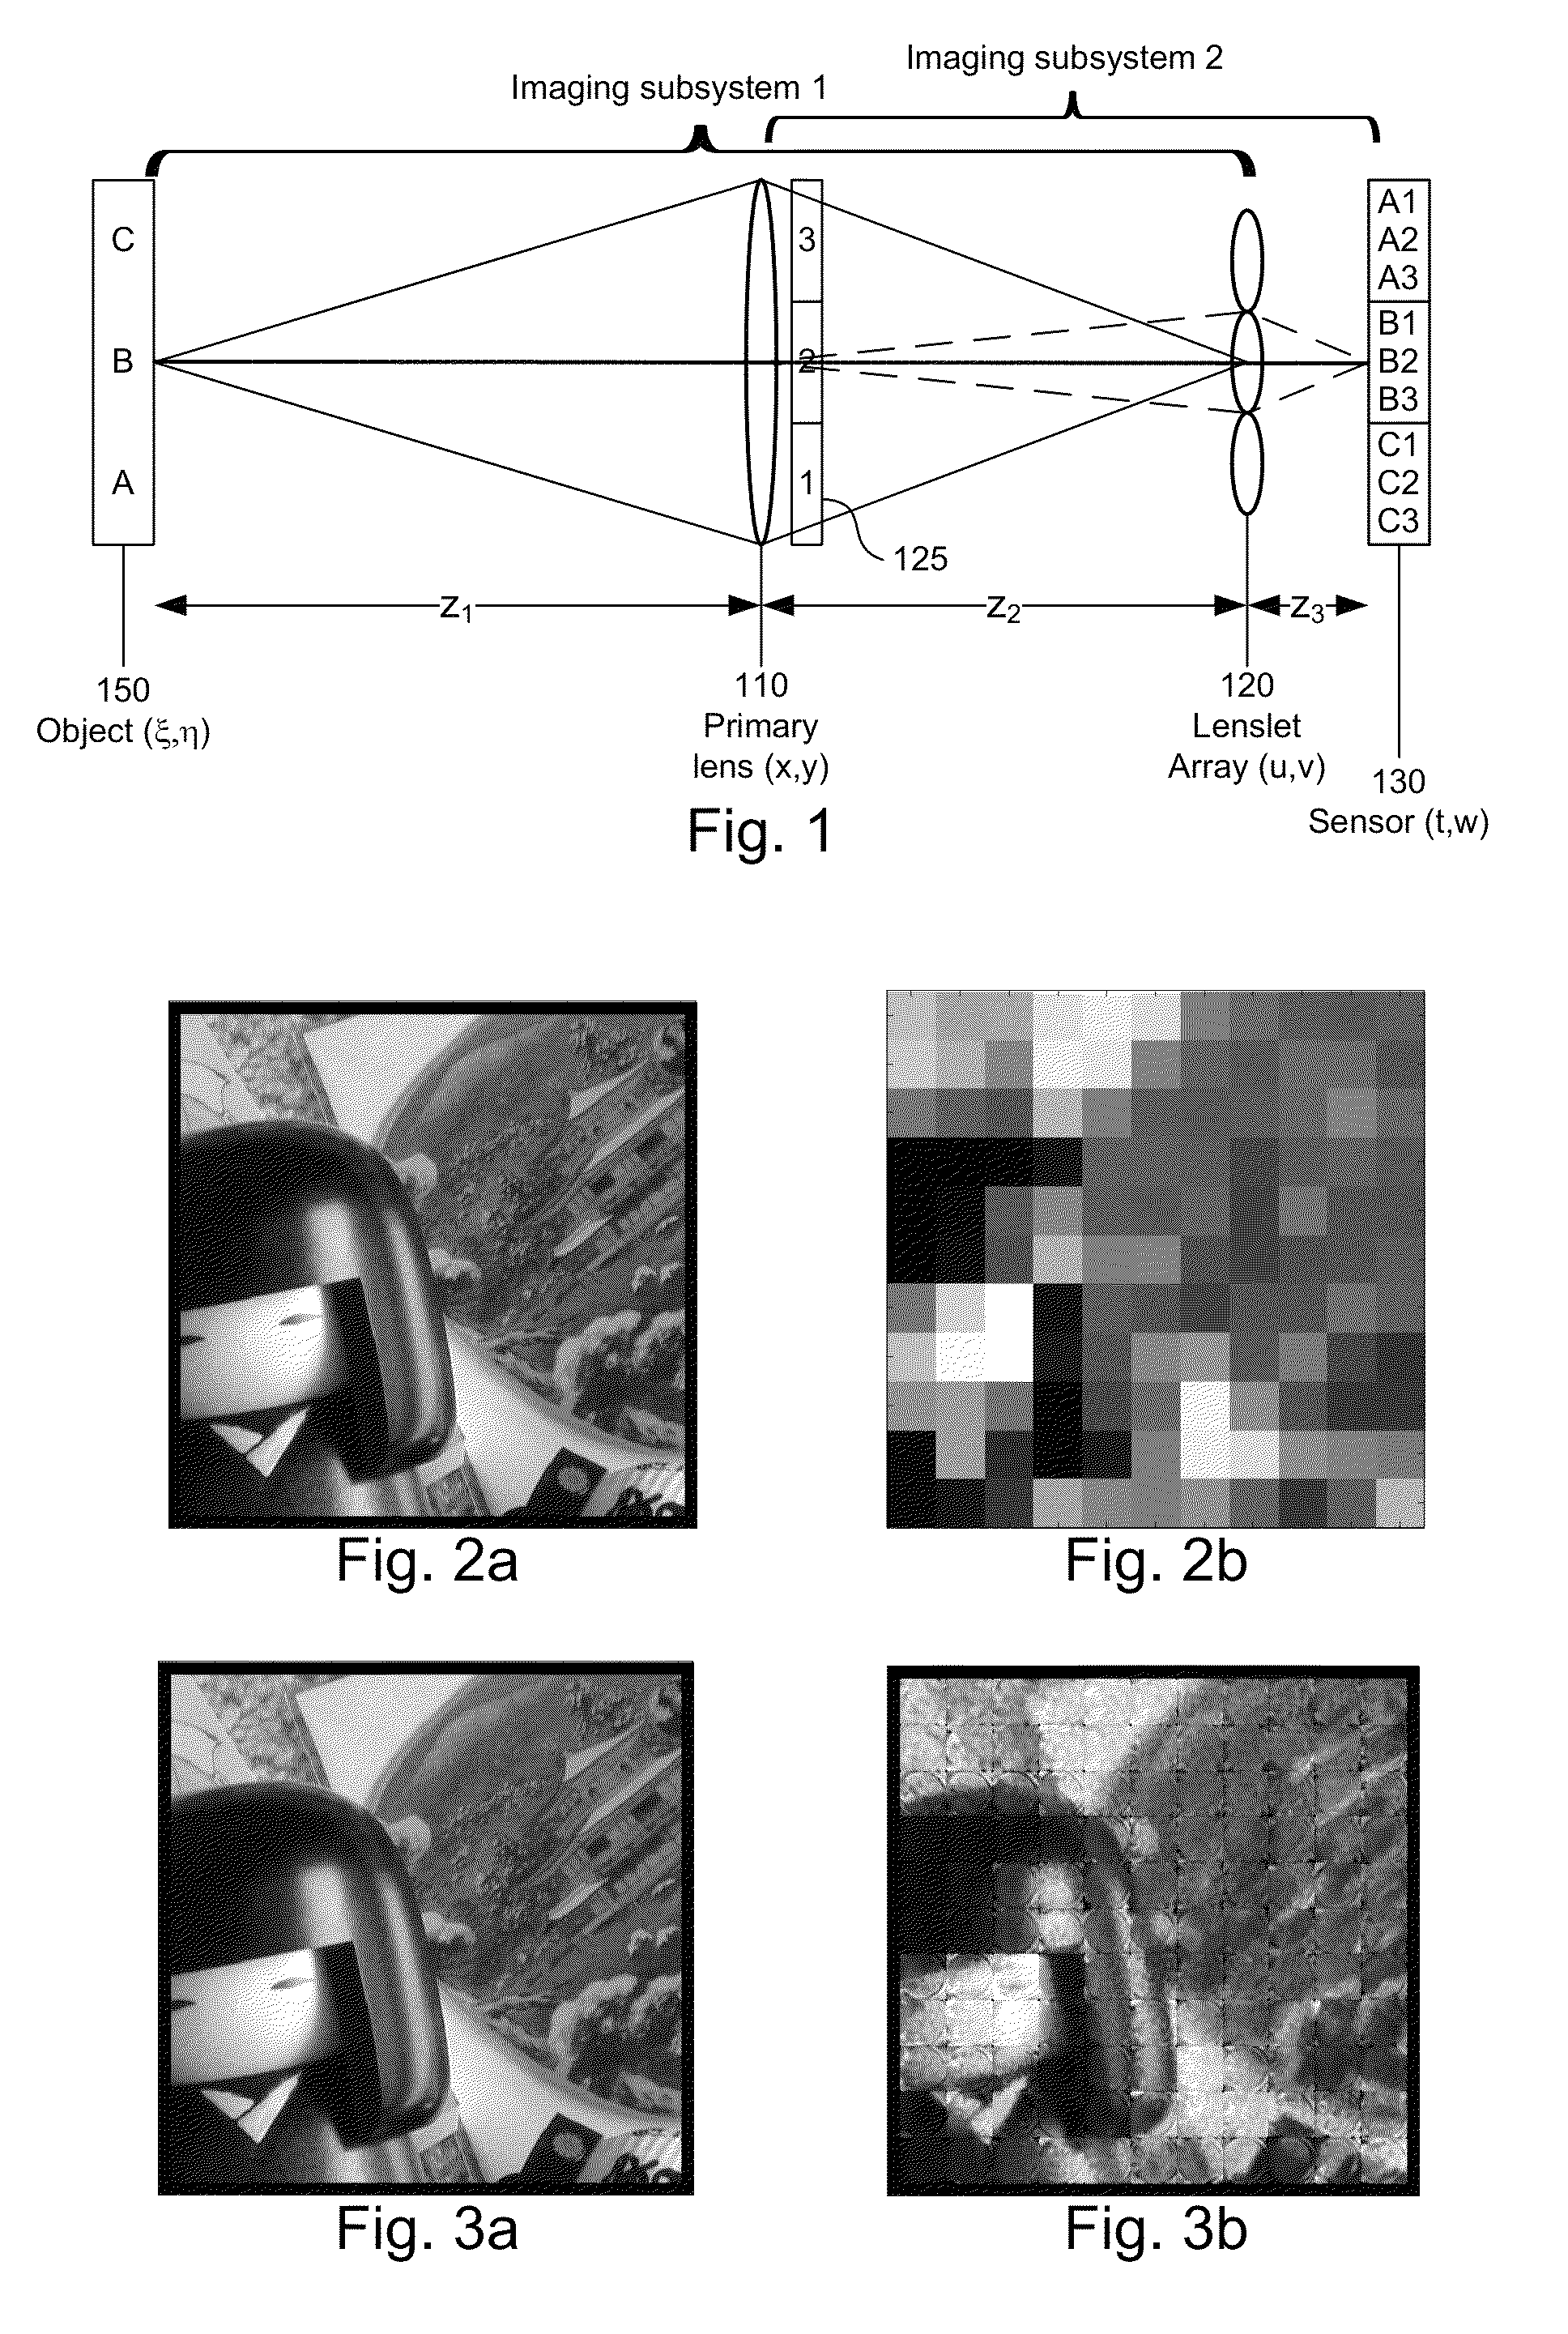 Spatial reconstruction of plenoptic images